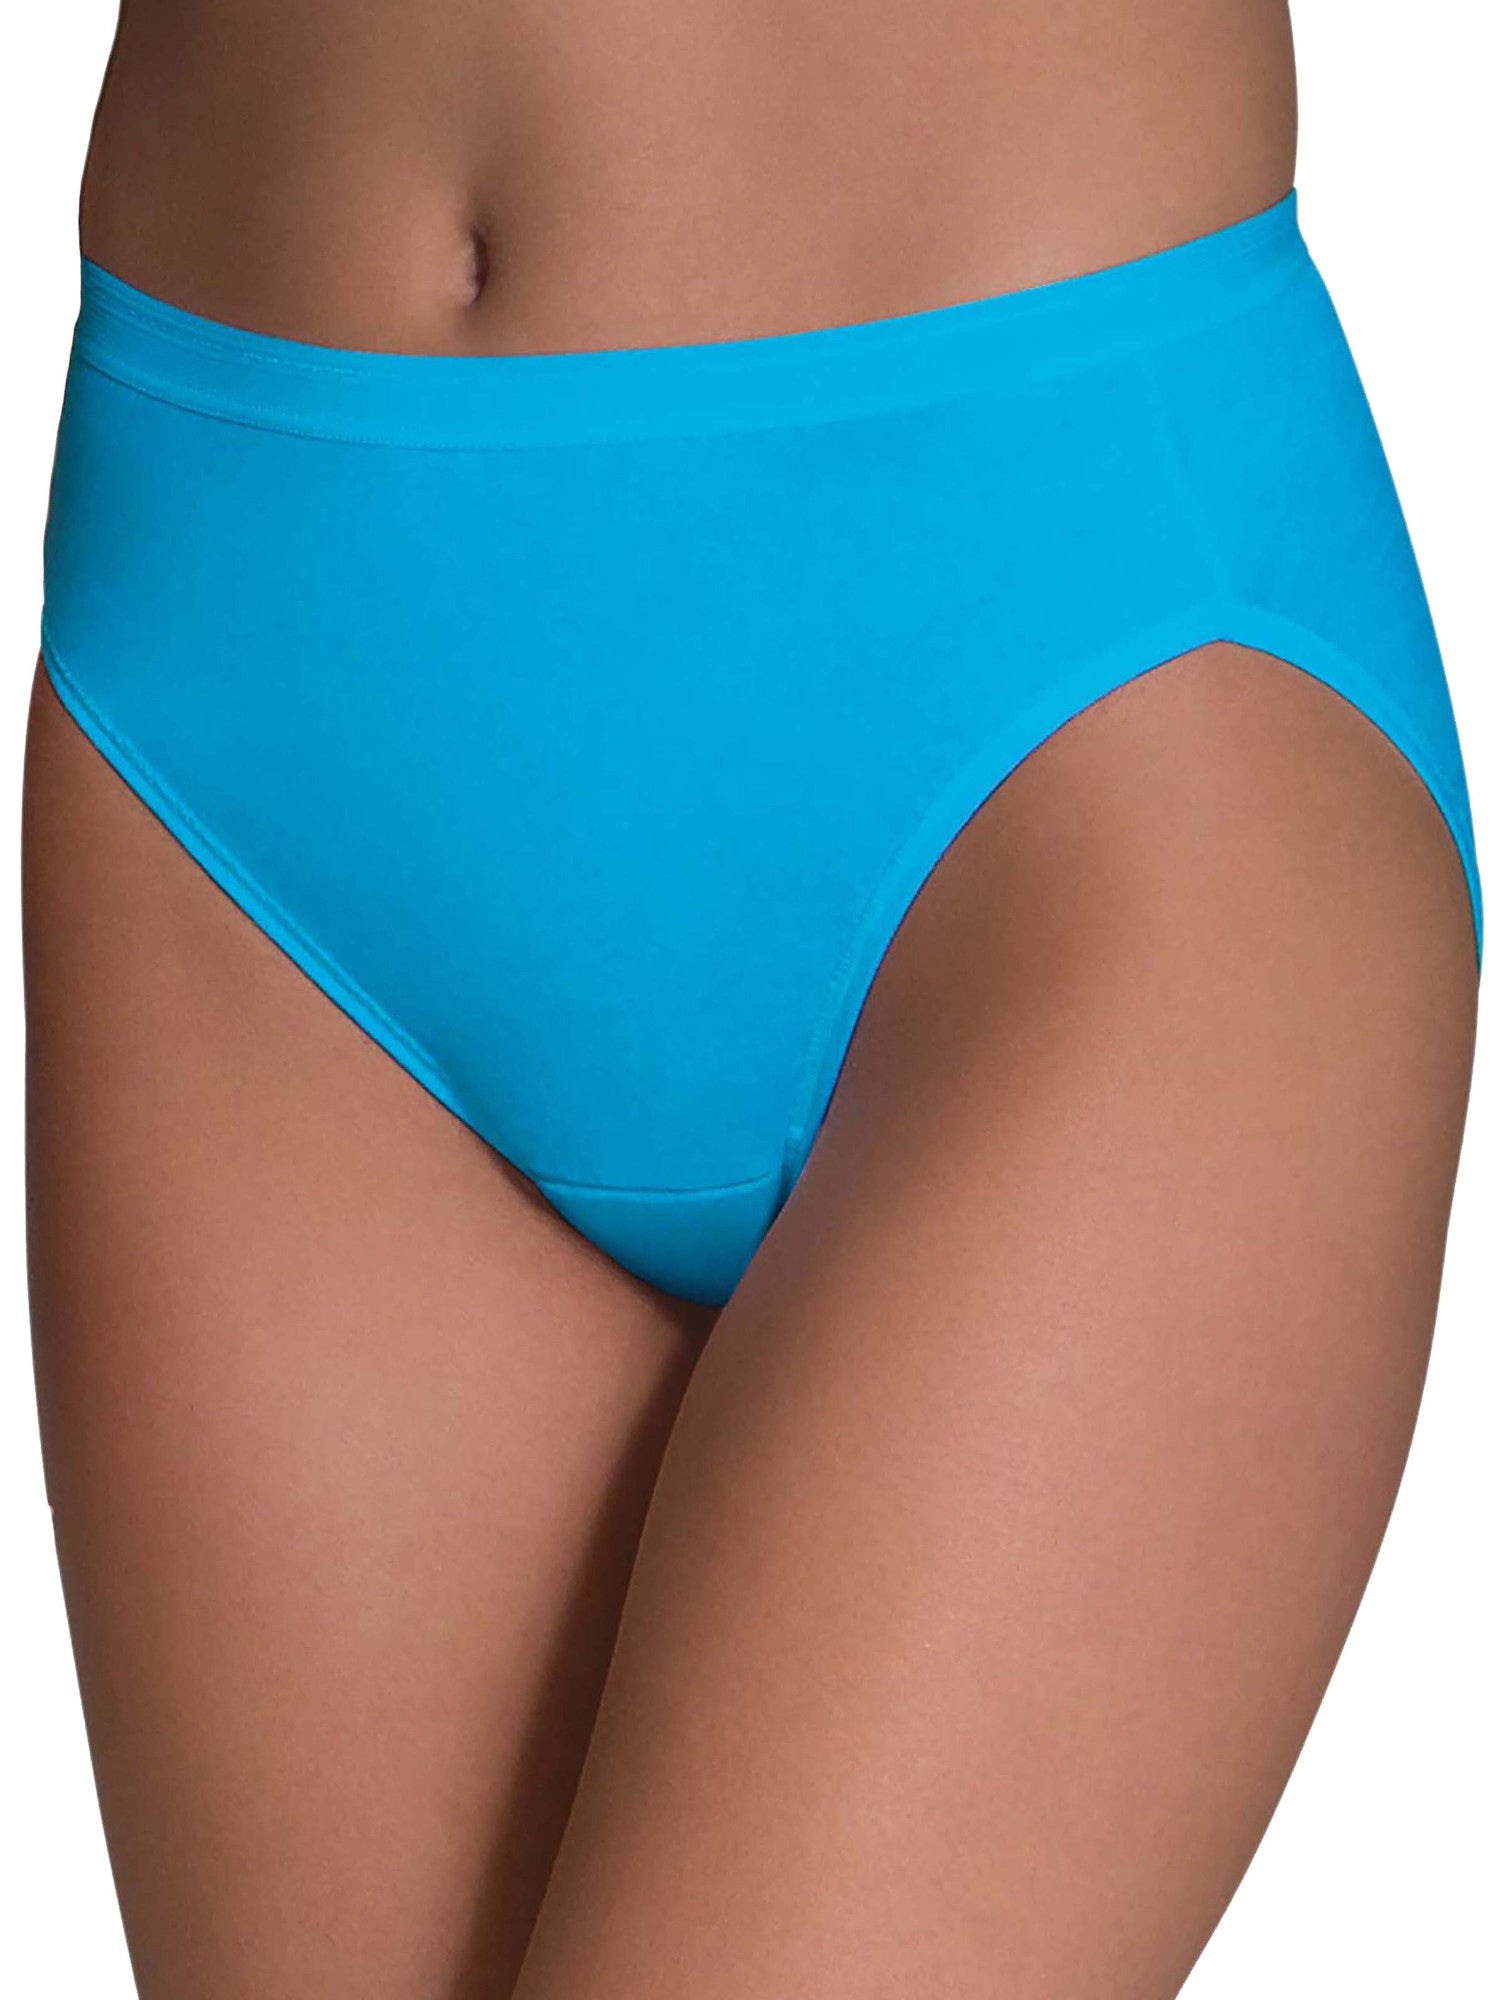 Fruit of the Loom Womens 3-Pack Assorted Cotton Panties